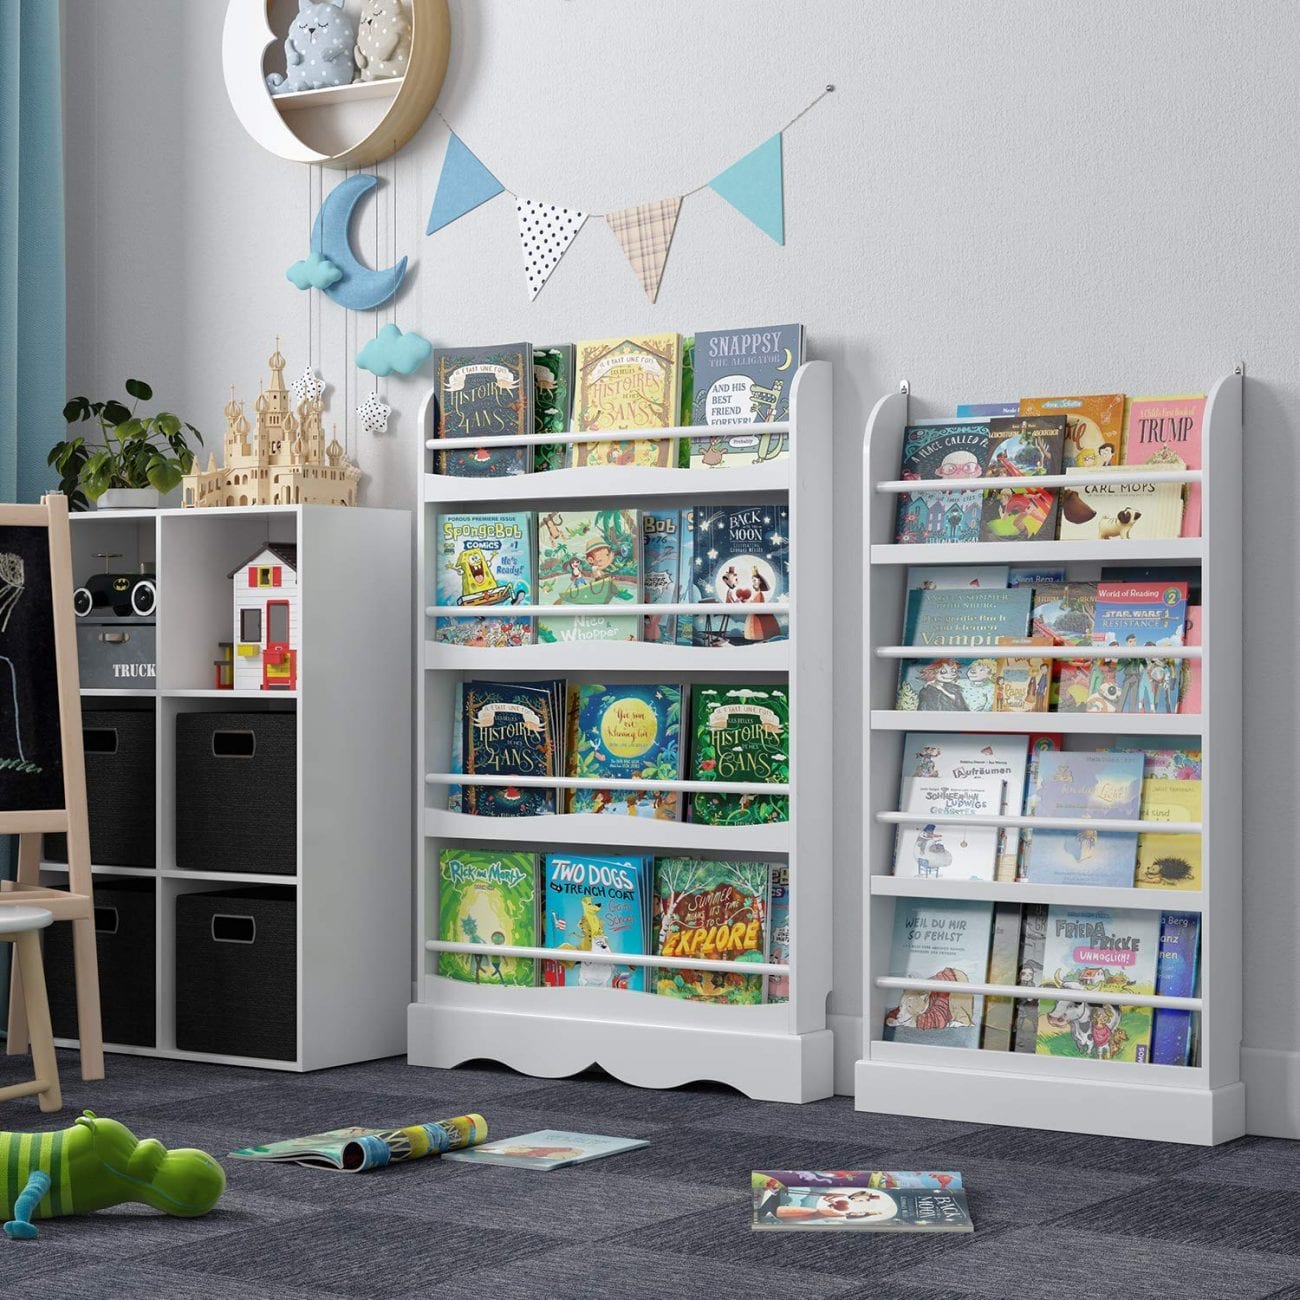 20 Amazing Classroom Bookshelves For All Your Organizing Needs